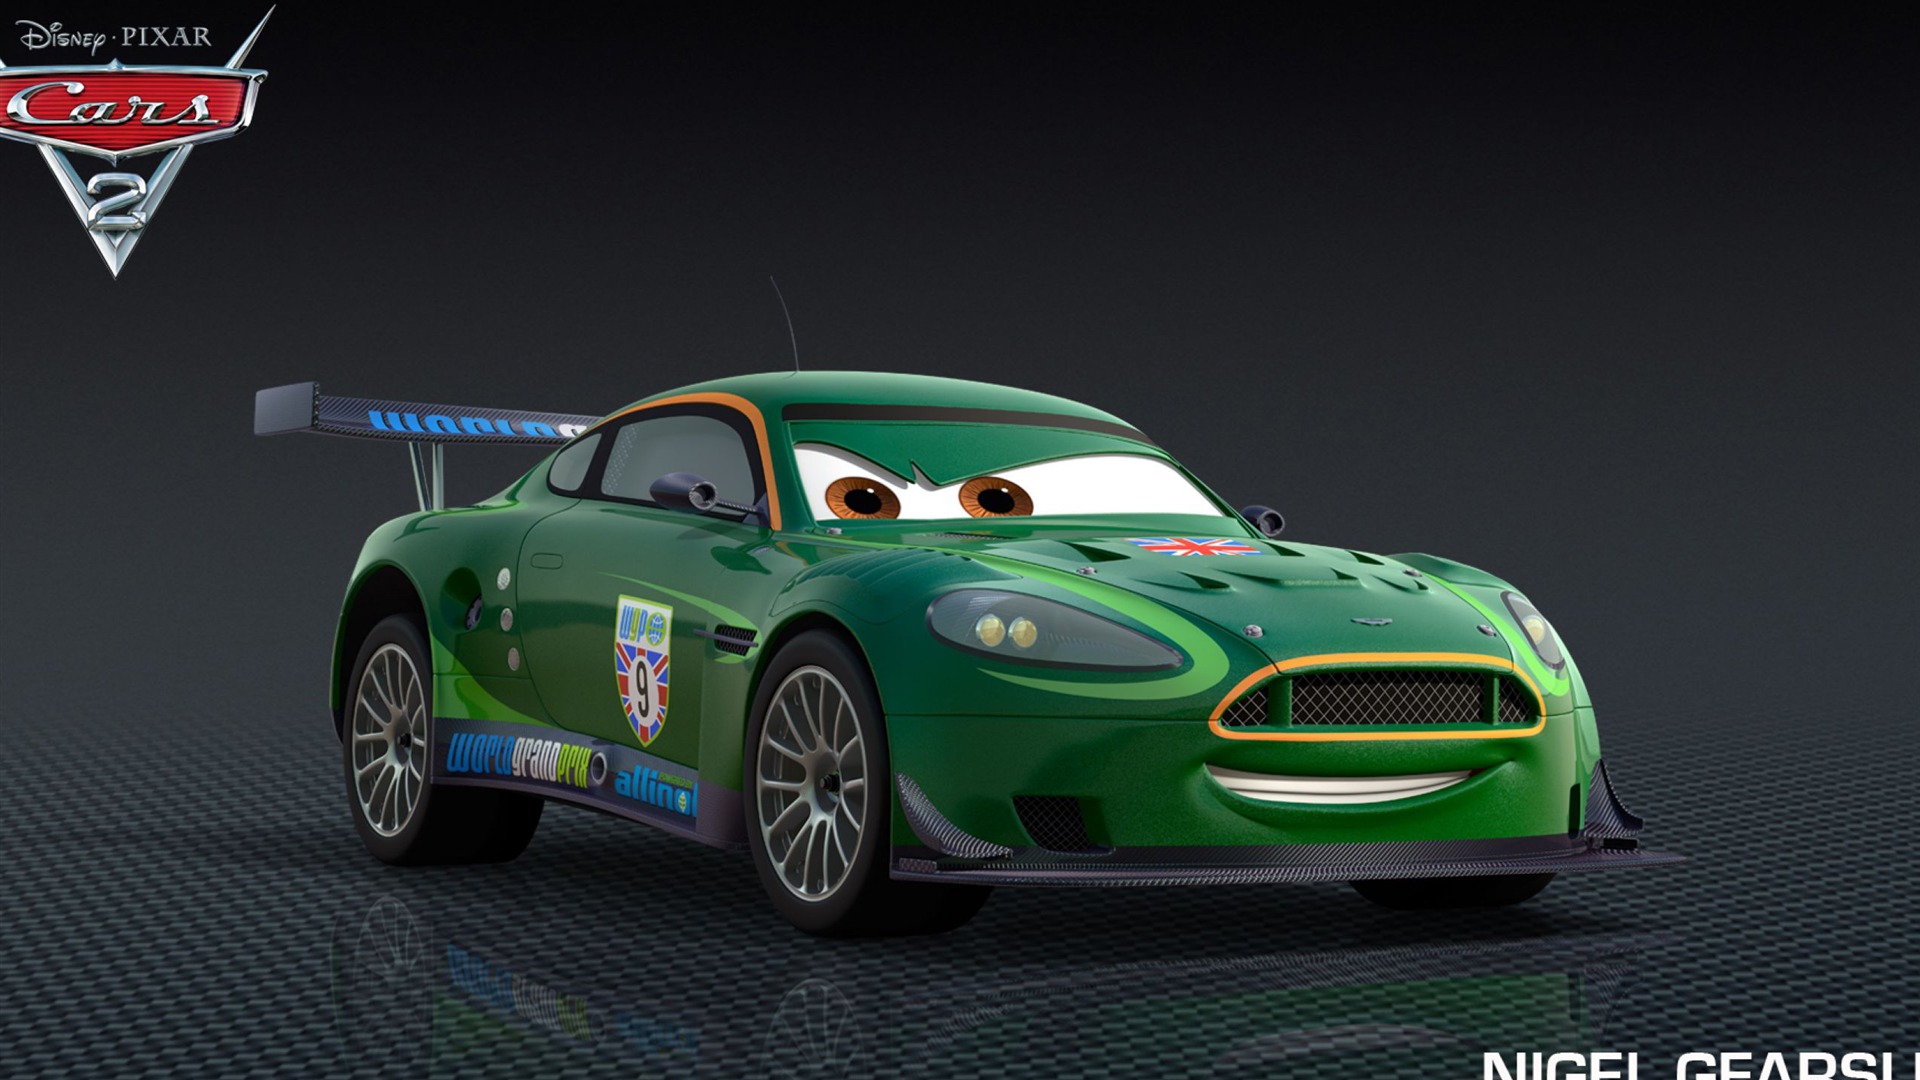 Cars 2 wallpapers #29 - 1920x1080